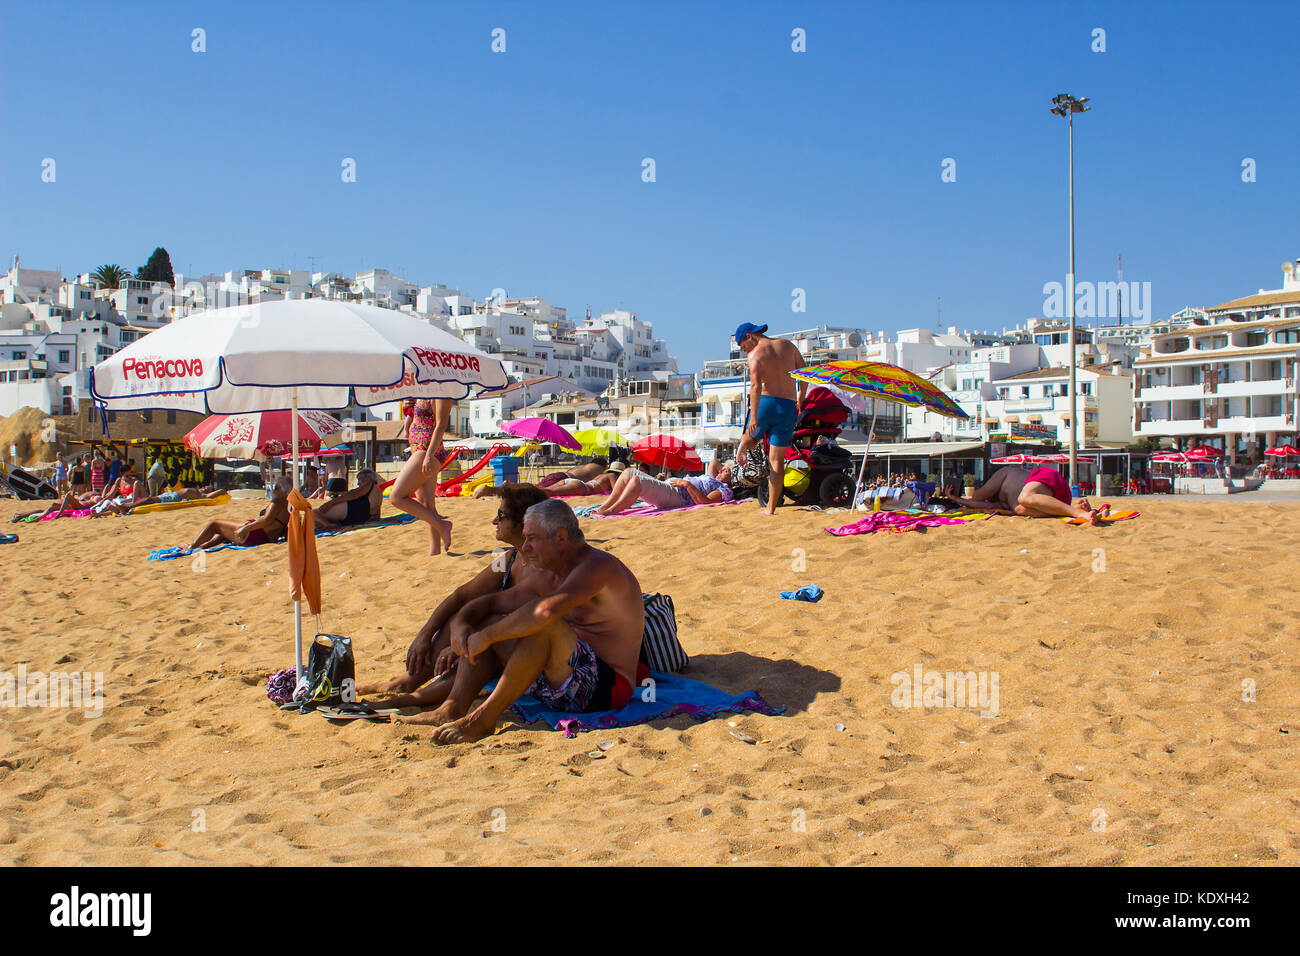 An elderly couple sitting in the shade of a sun brolly on the sandy beach in Albuferia in Portugal Stock Photo